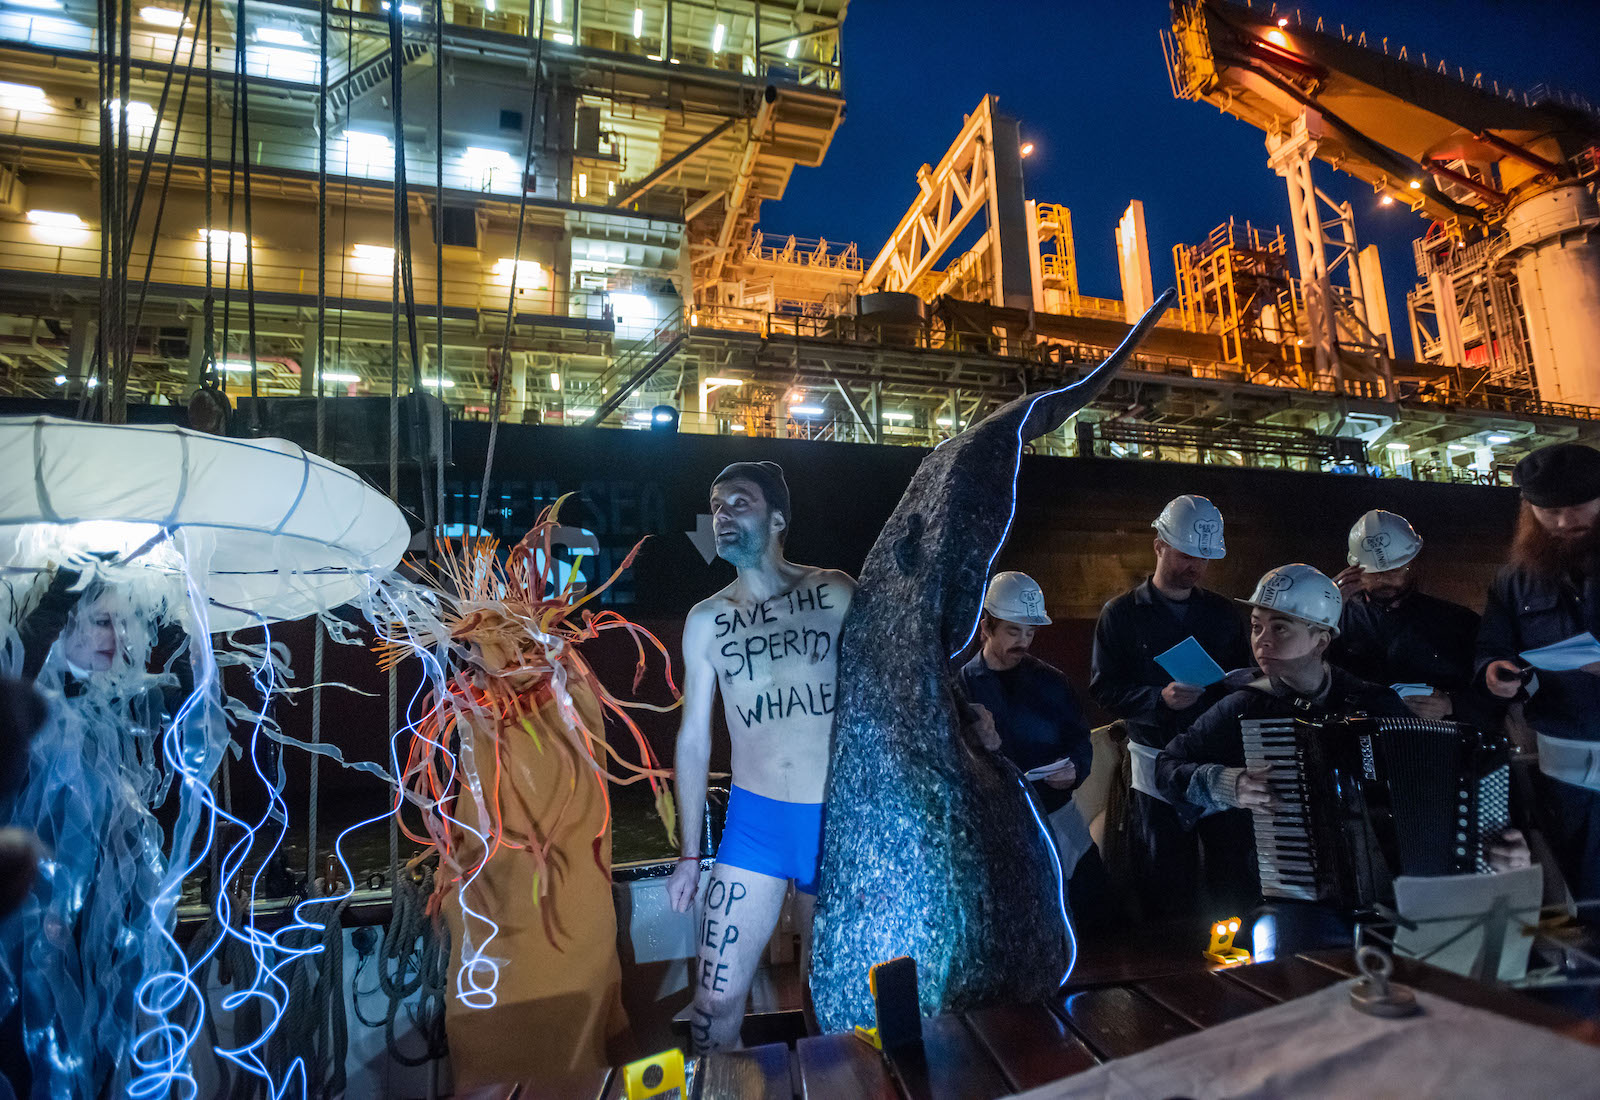 group of people, some wearing sea creature costumes, protesting in front of large deep sea mining ship